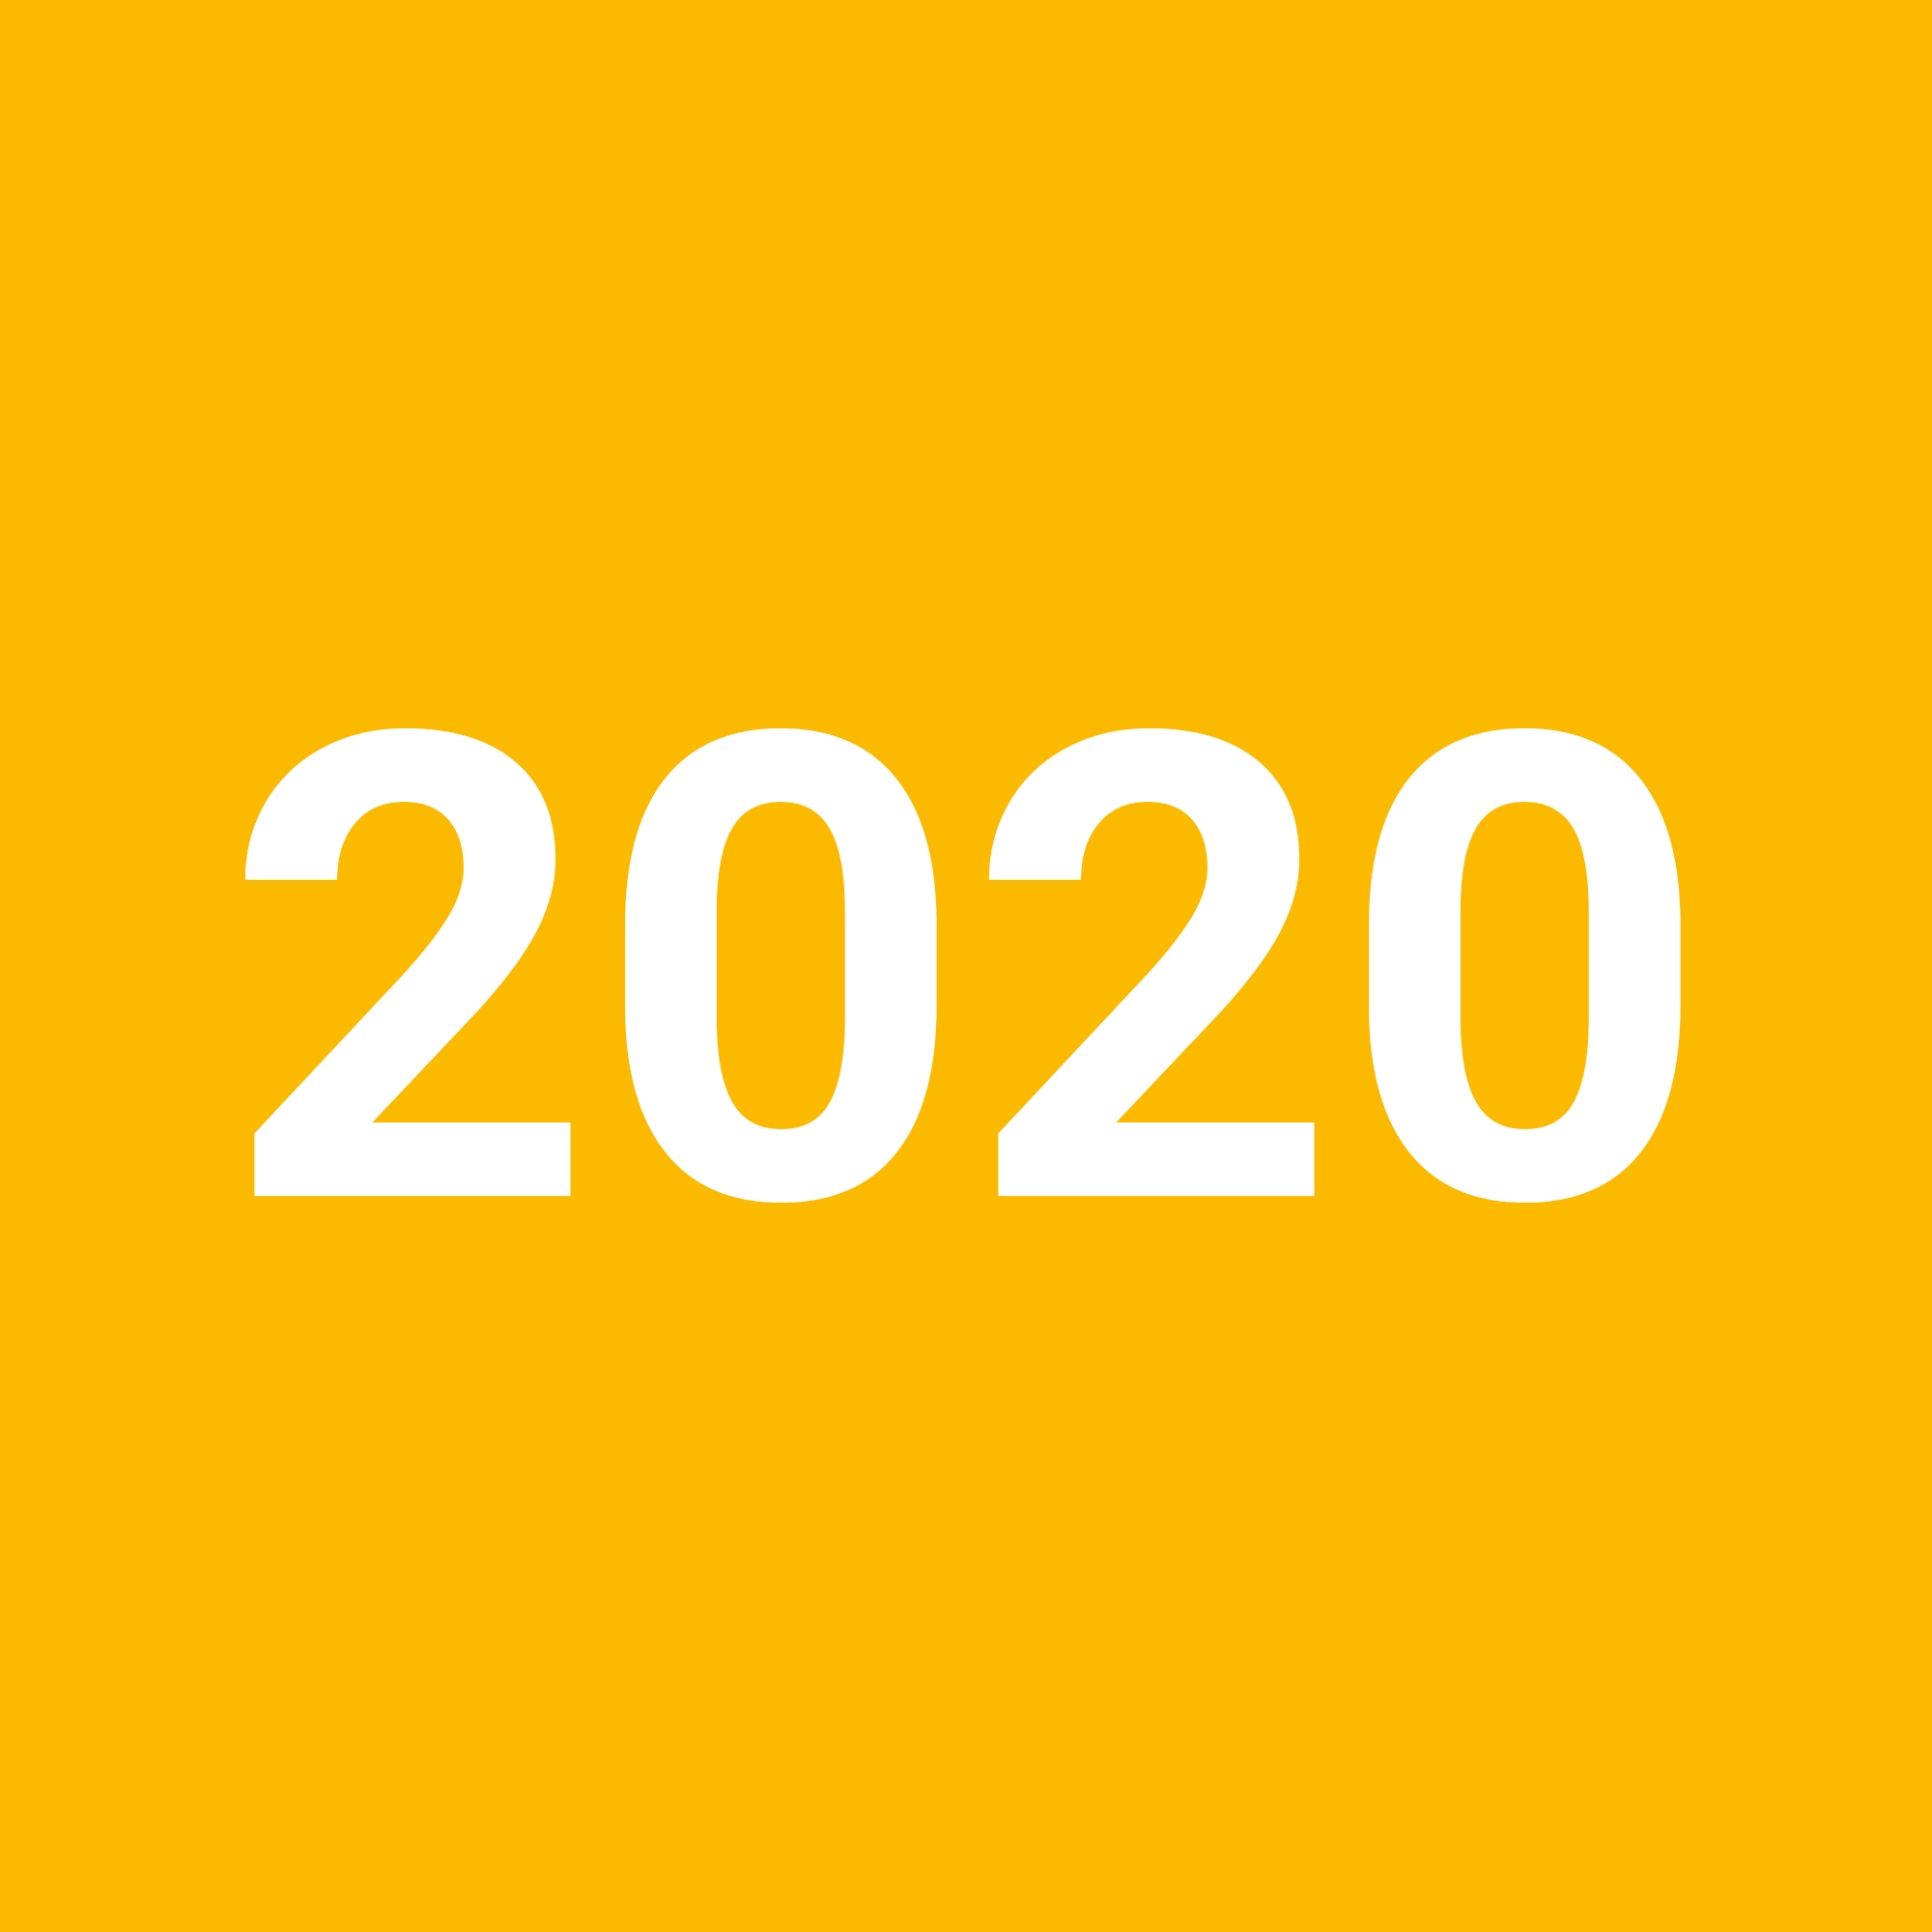 2020 on a yellow background